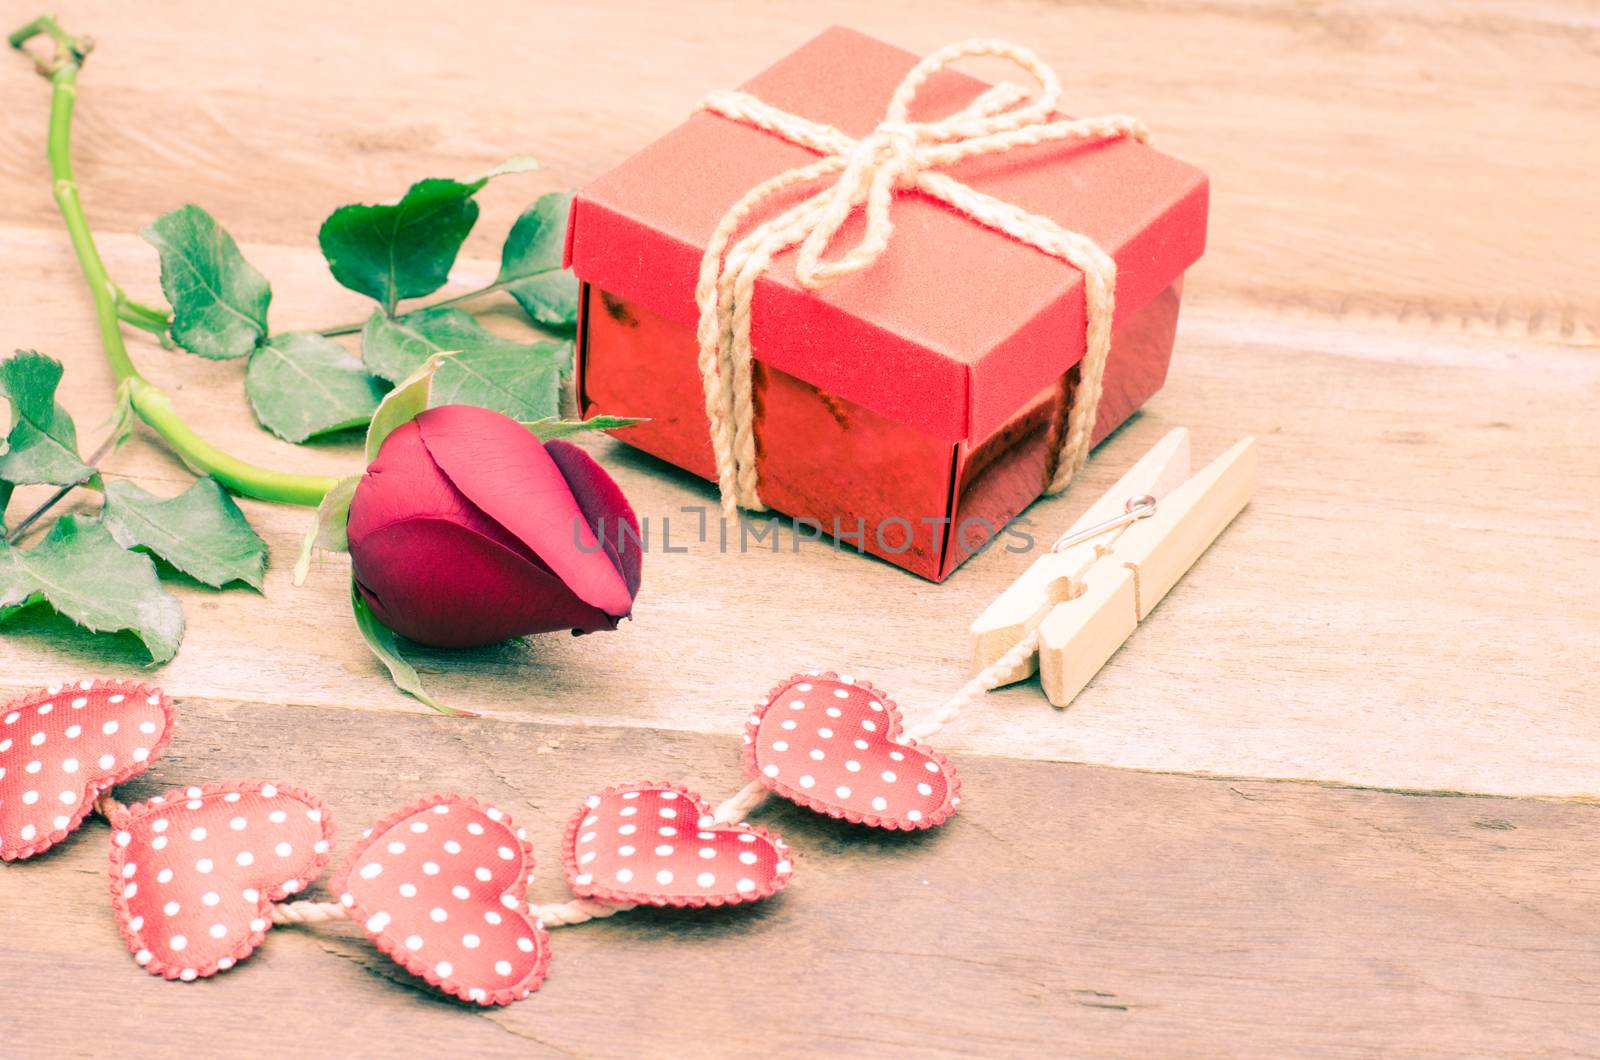 roses and gift box on wooden background by photobyphotoboy